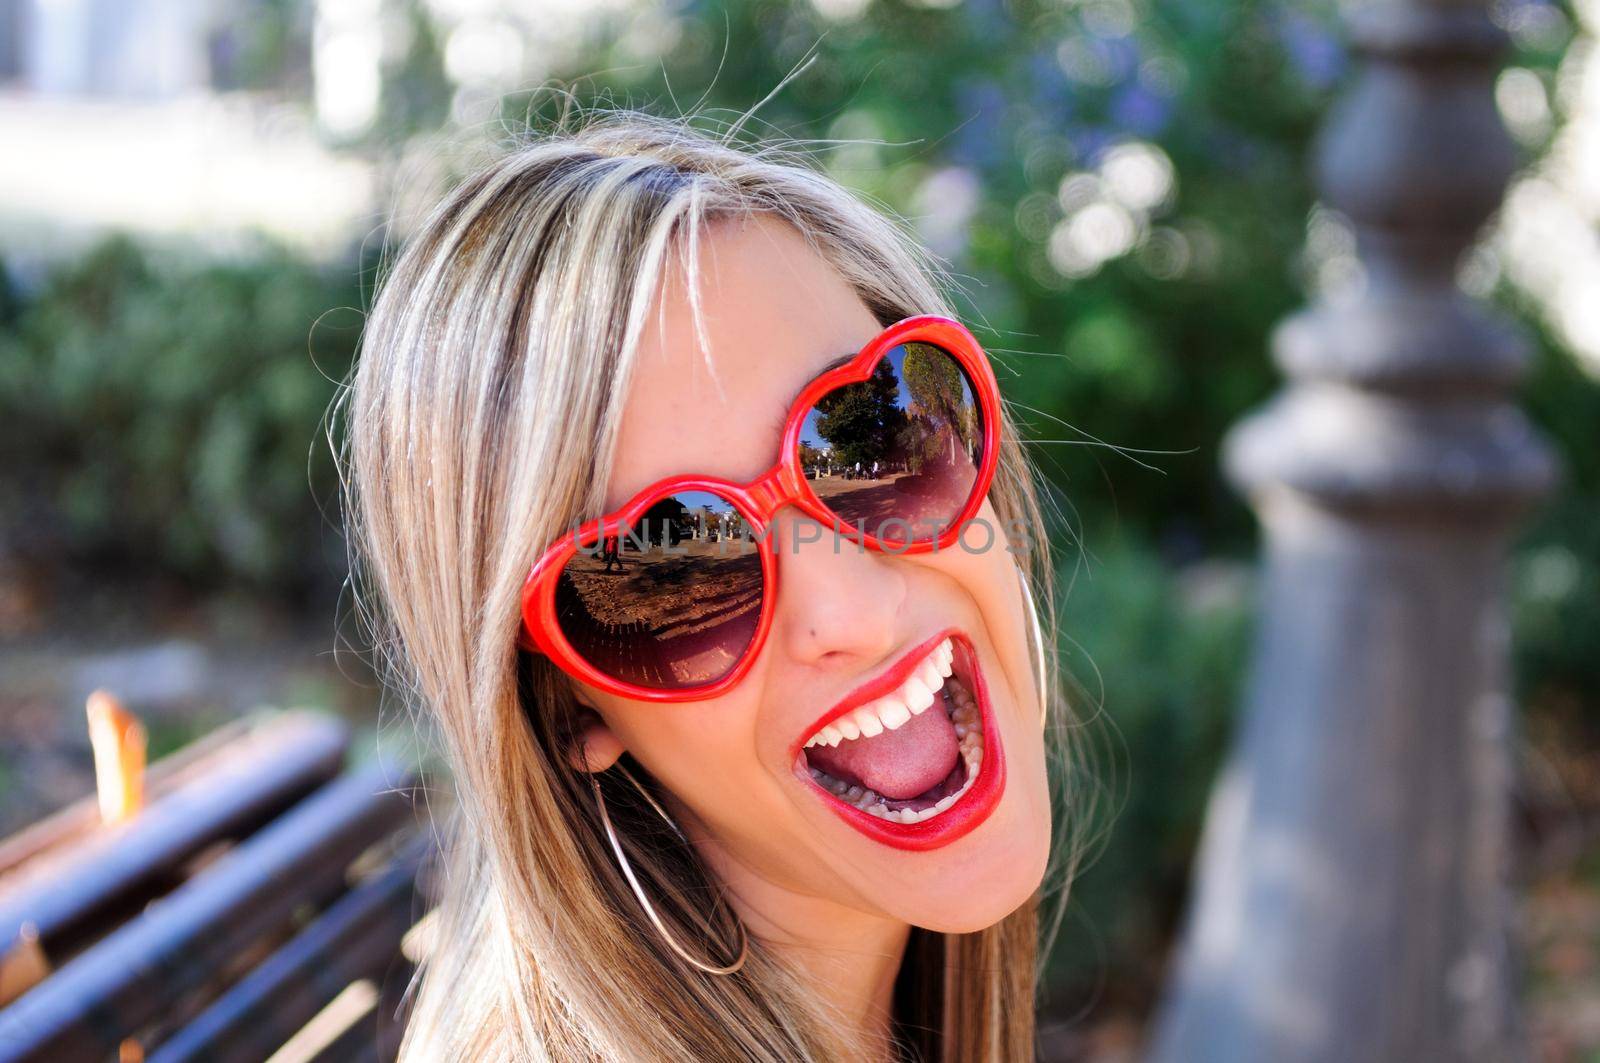 Funny girl with red heart glasses by javiindy